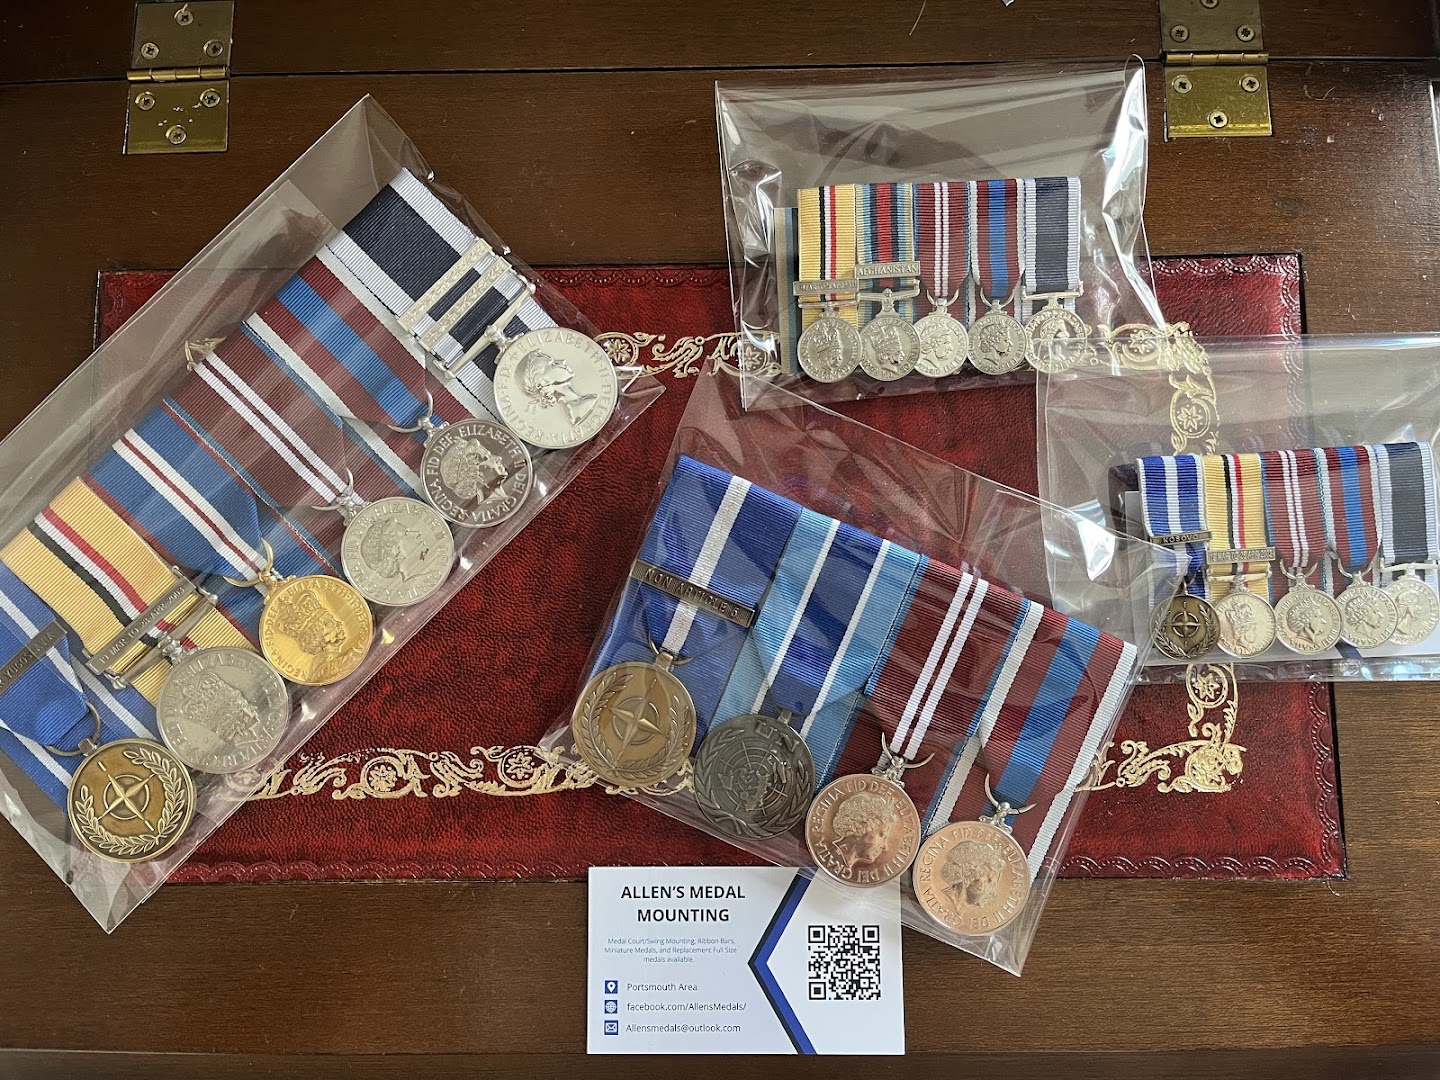 Allen's Medal Mounting - Medal mounting and uniform services